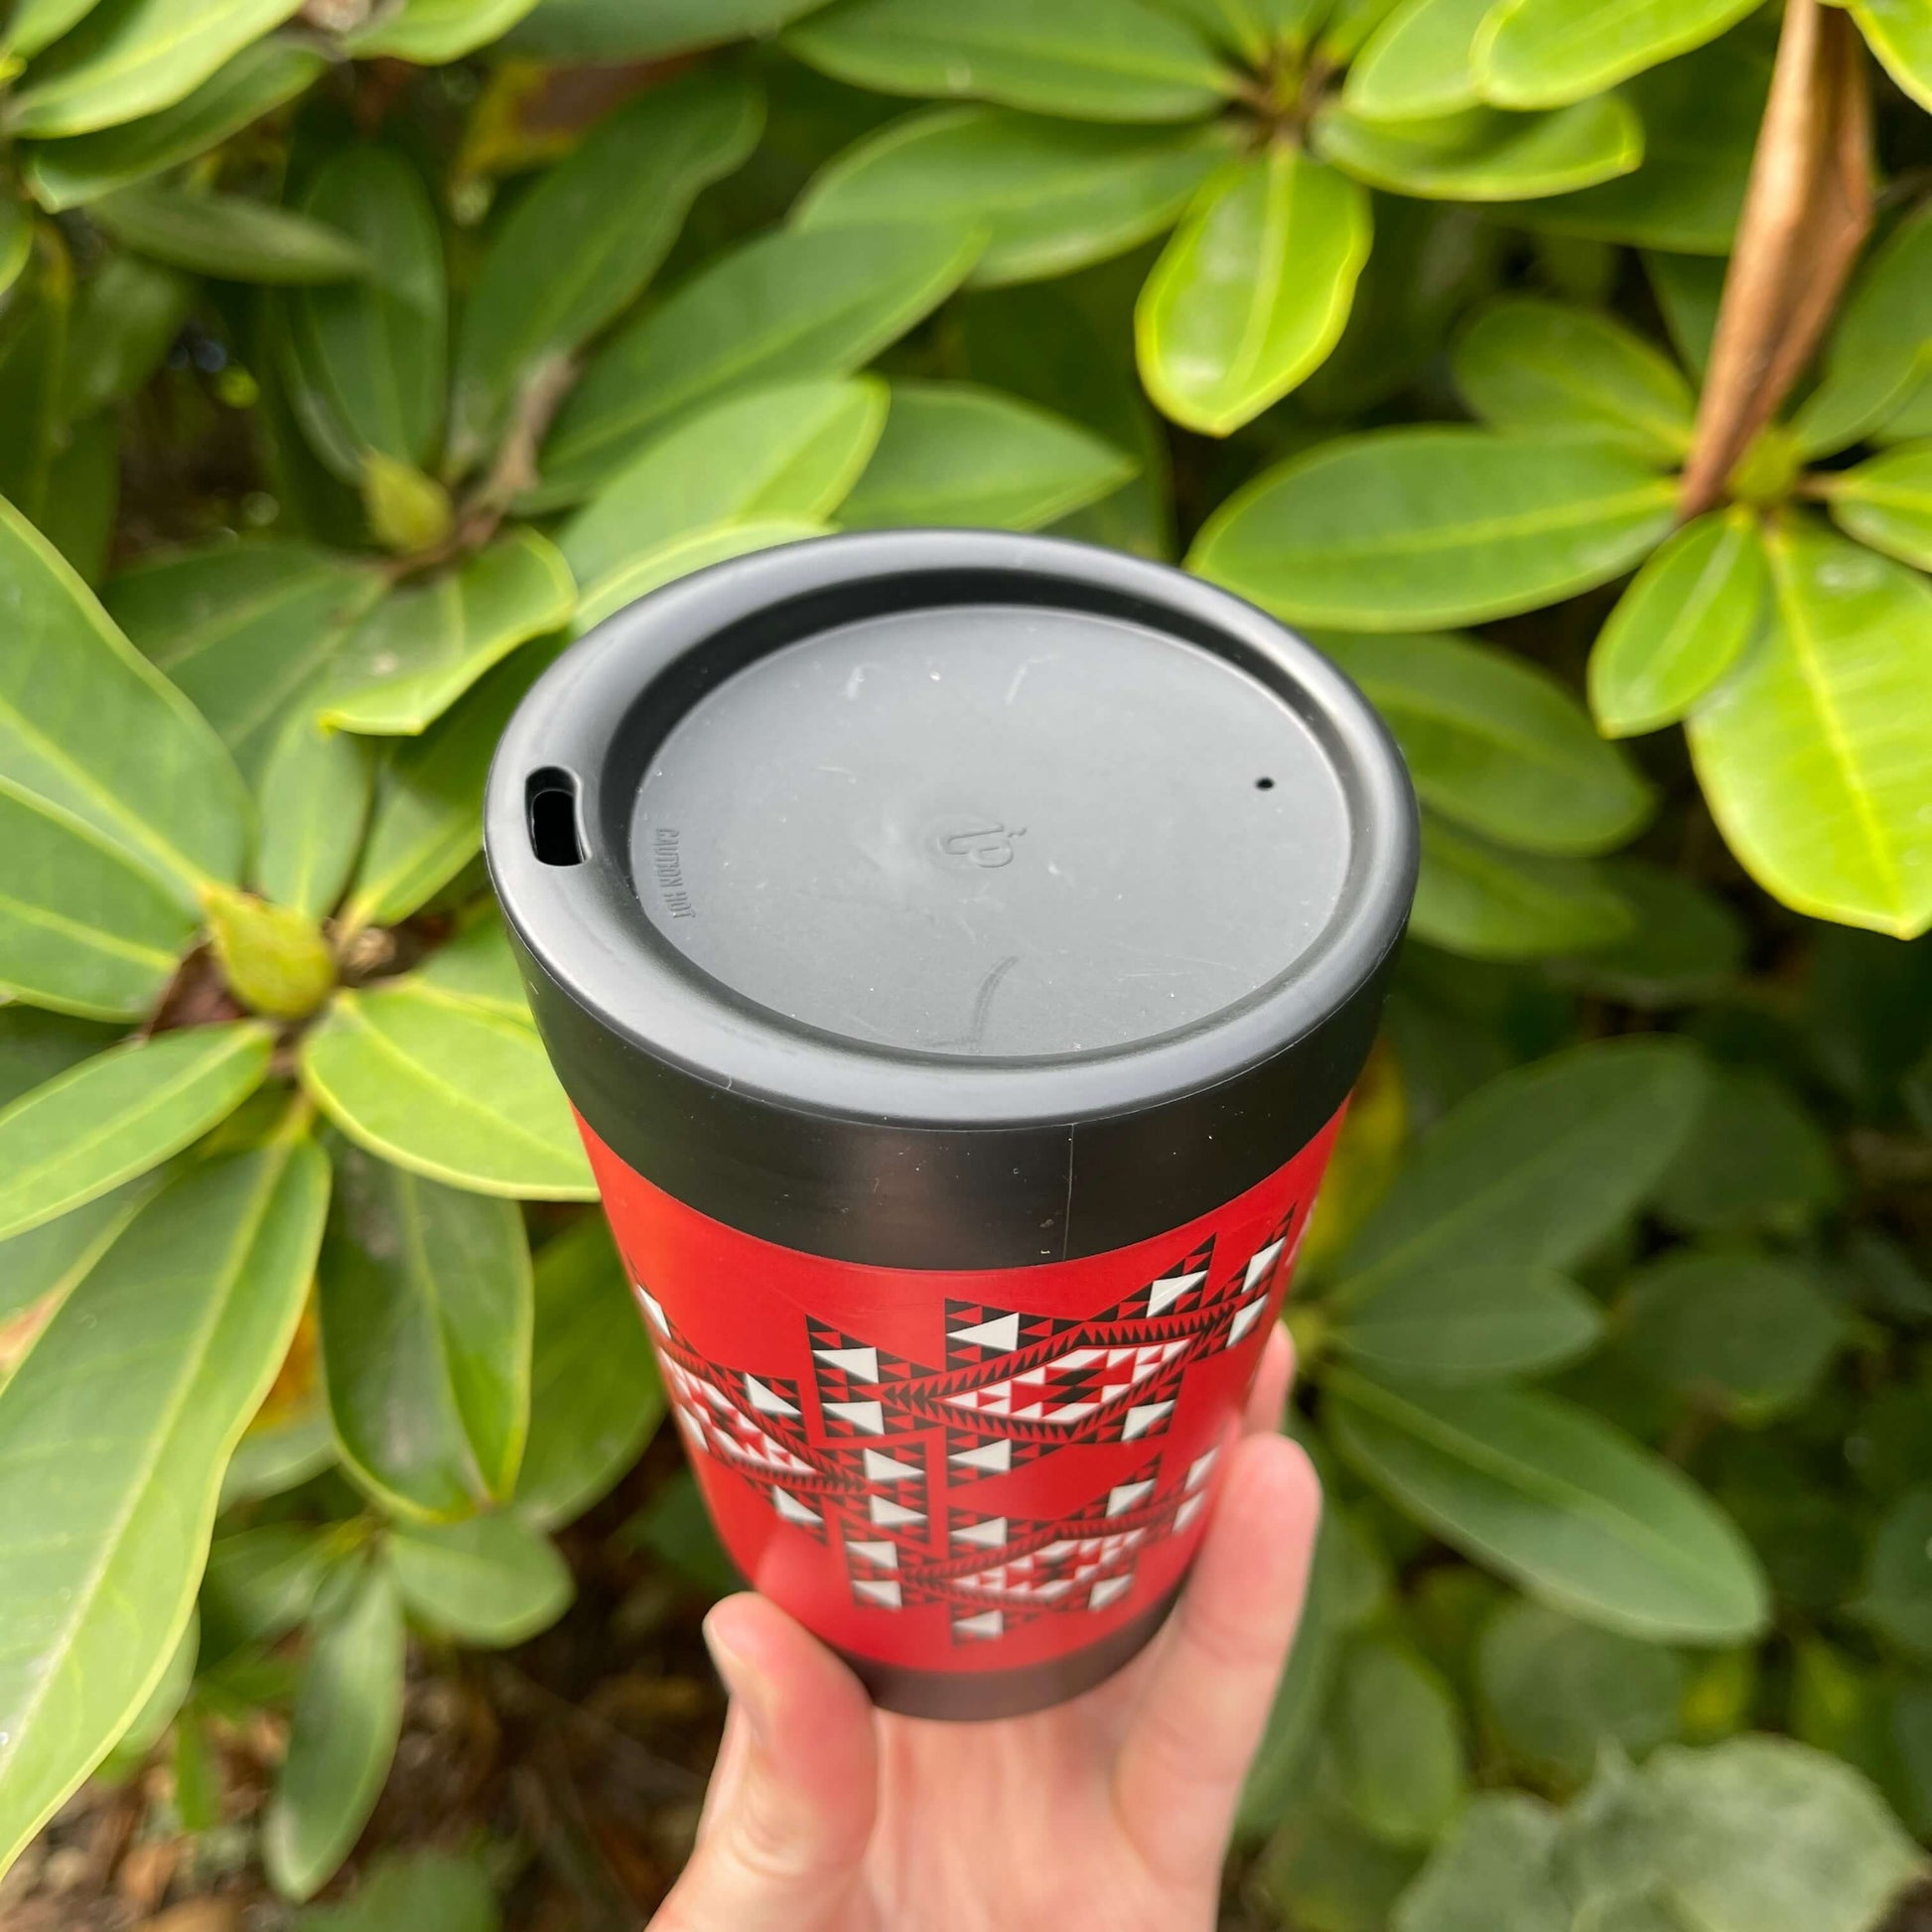 Reusable coffee cup in black with red, white and black wrapped image featuring Maori patterns and showing the lid with sipping hole.